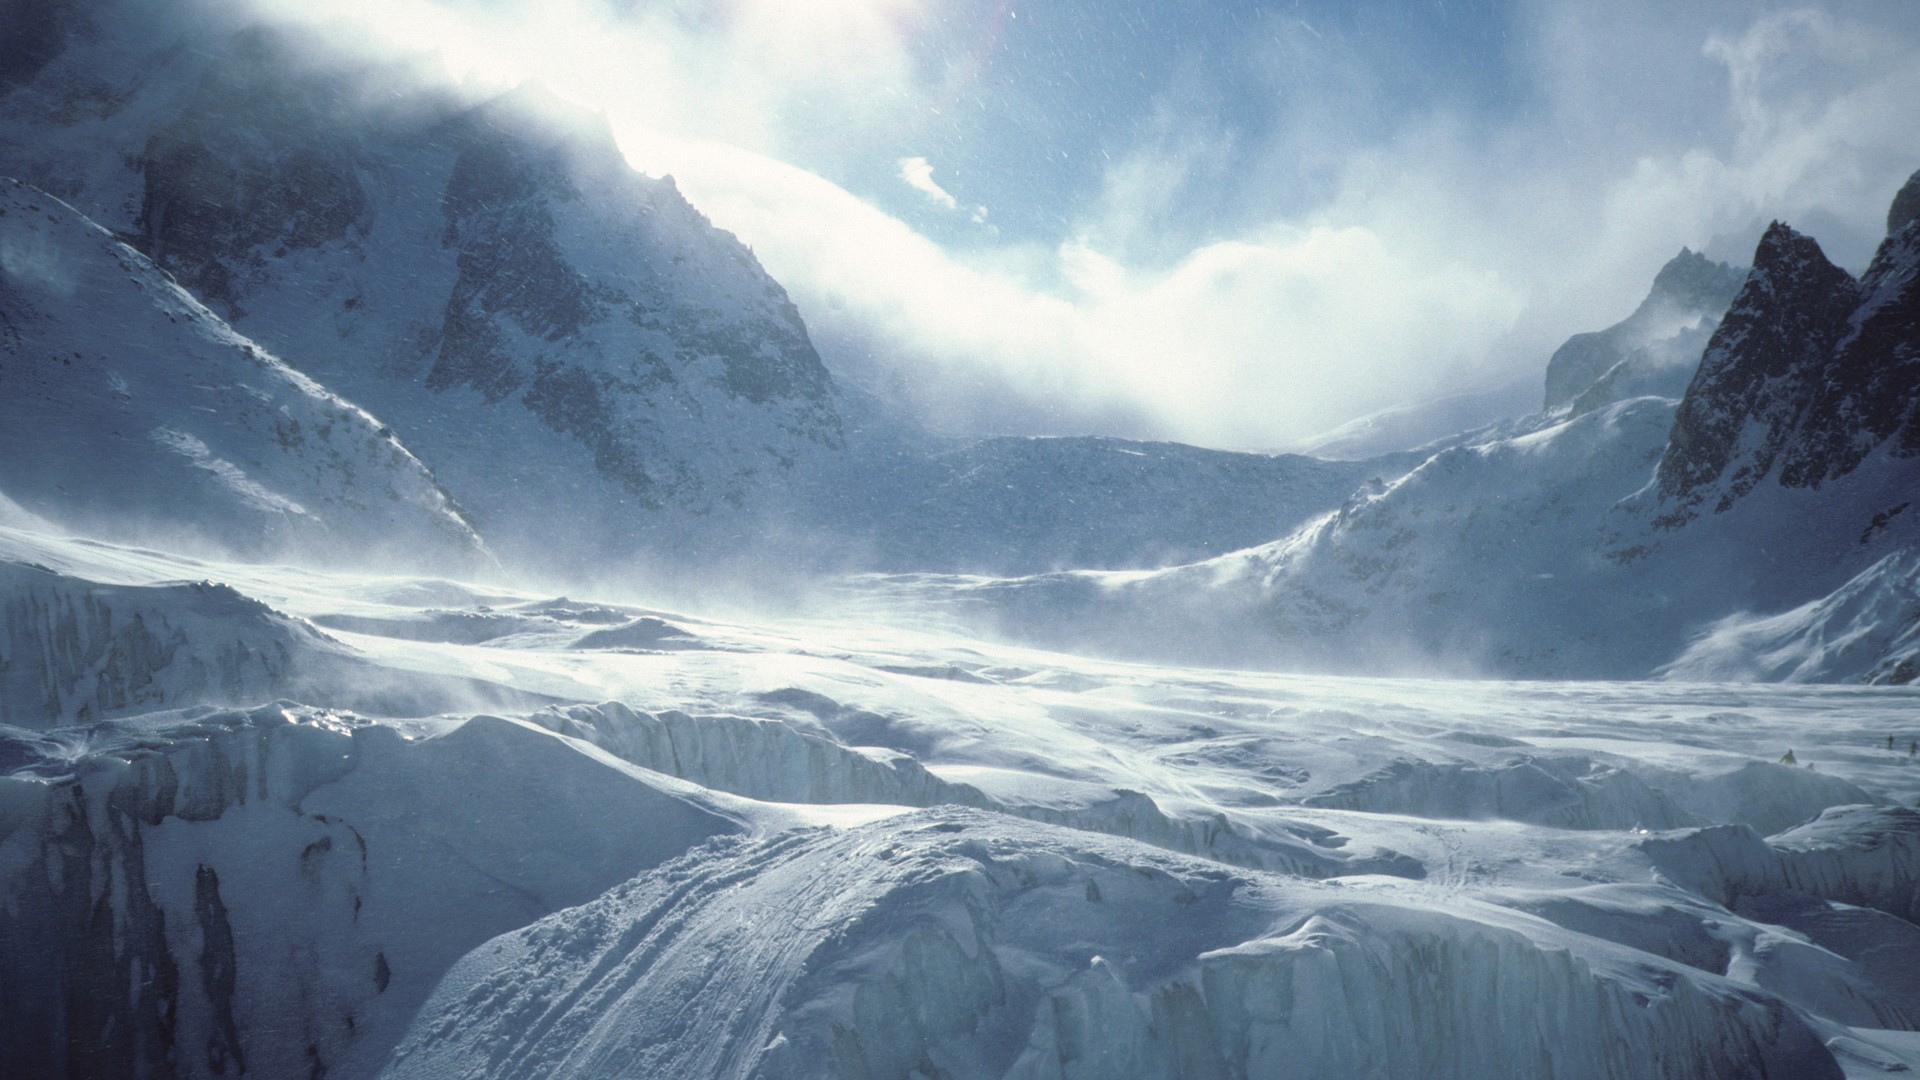  Ice Mountains backgrounds Wallpaper and make this wallpaper for your